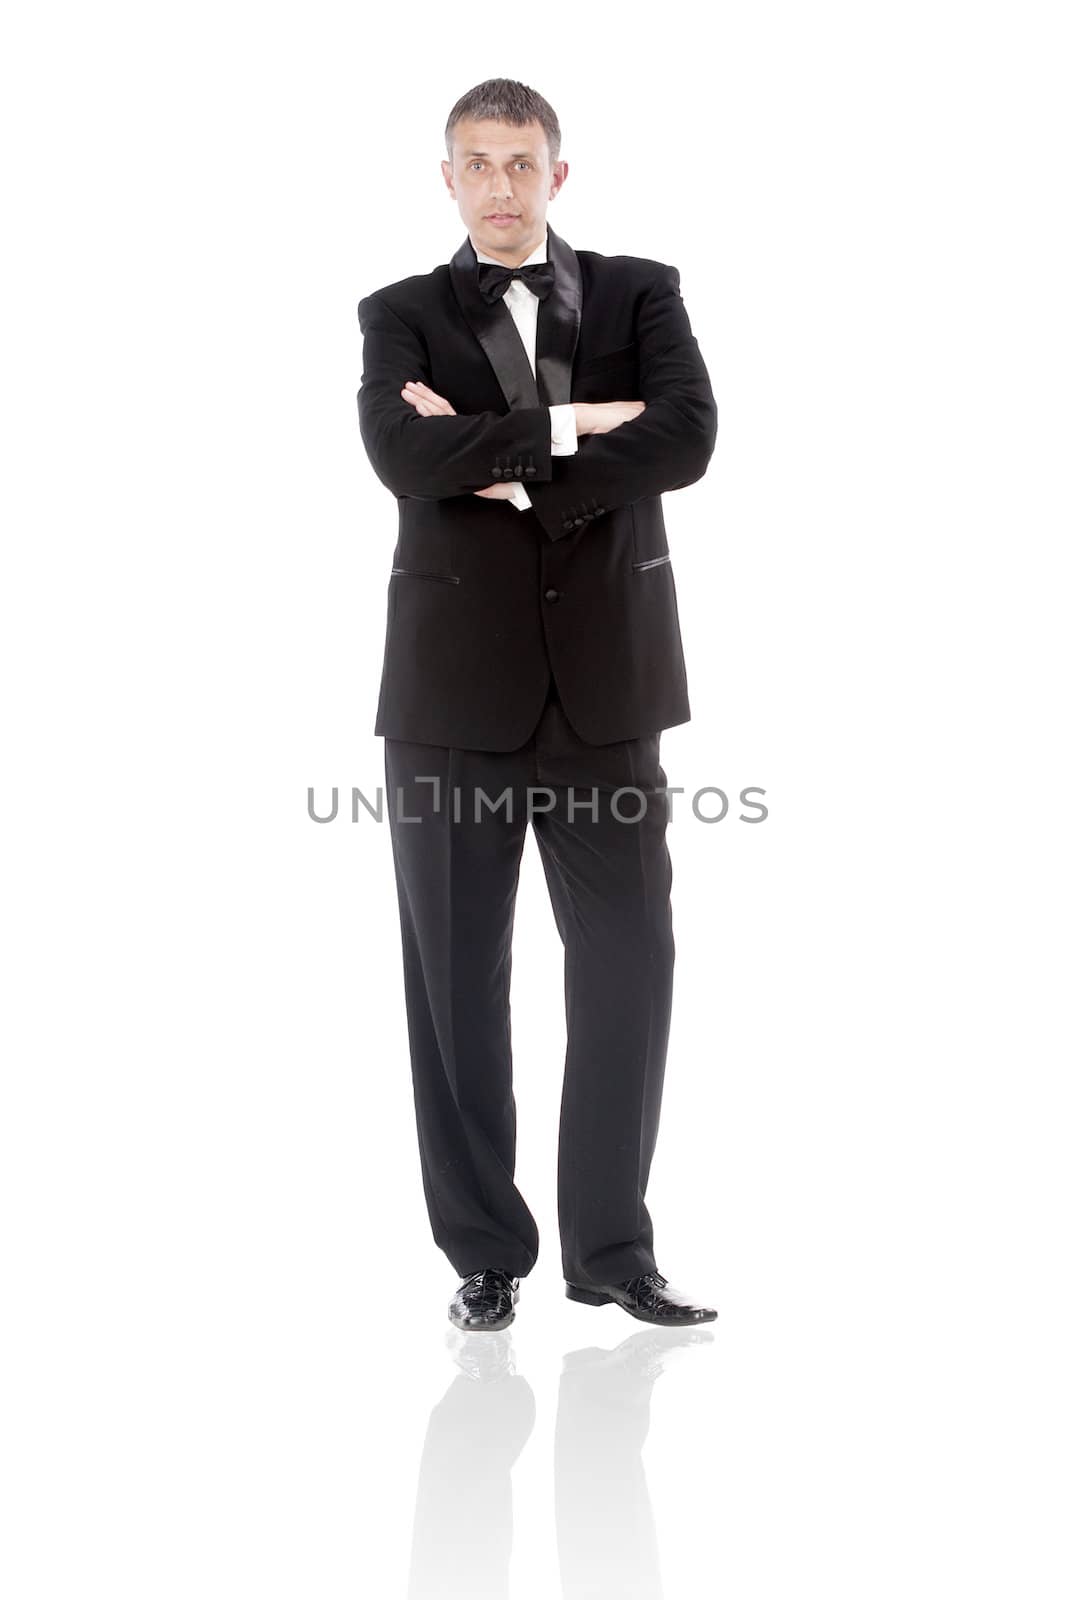 The elegant man in a classical tuxedo on a white background by sergey150770SV